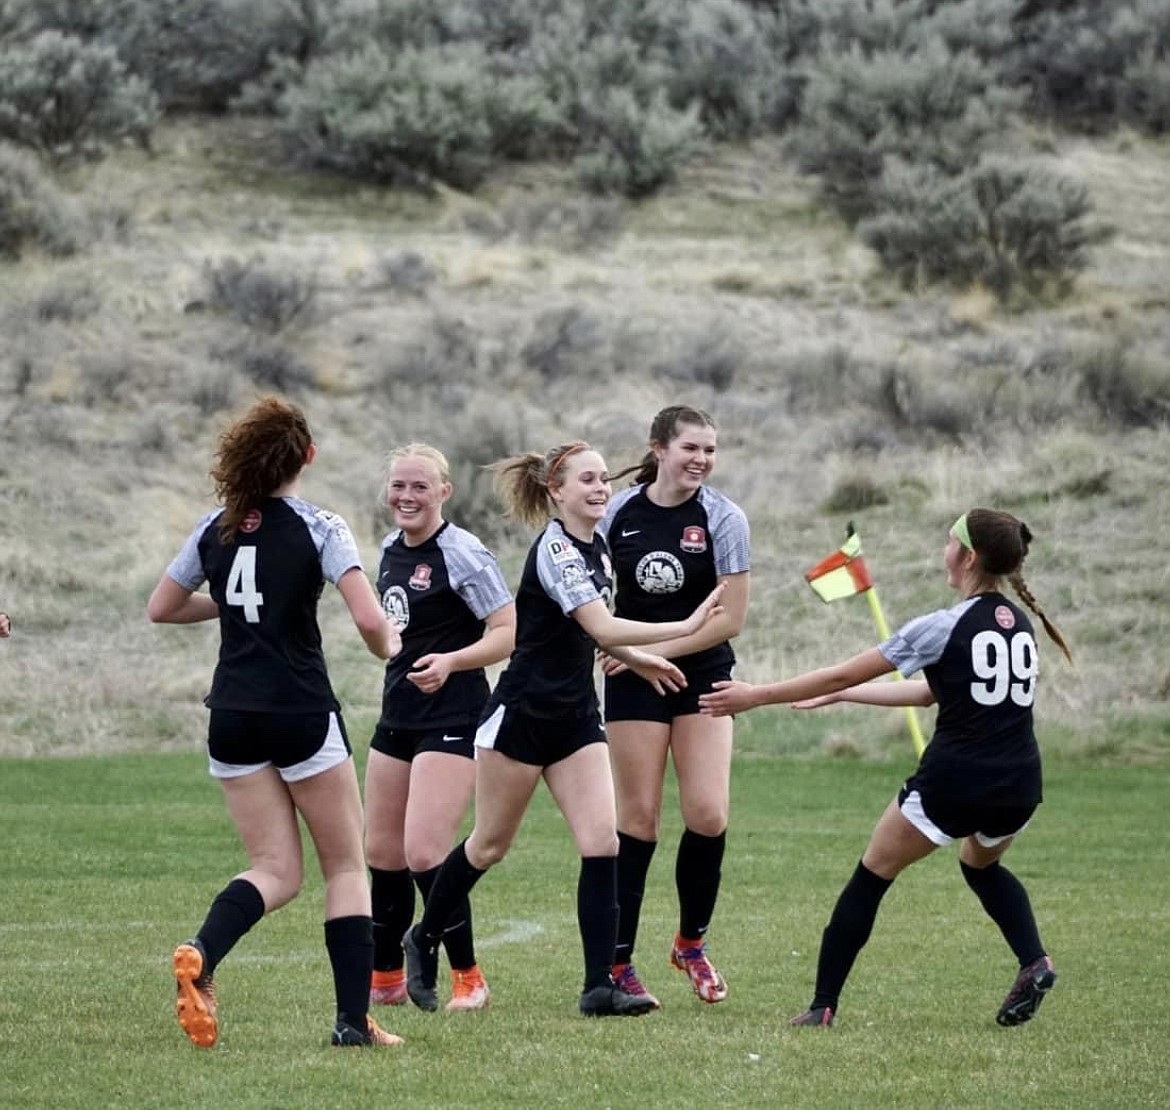 Photo by MICHAELA OBERGH
Evelyn Bowie (4), Kennedy Hartzell, Marlee McCrum, Libby Morrisroe and Ava Glahe (99) of the Thorns North FC 07 girls Academy soccer team celebrate a goal vs. BTT 07G ECNL team during state league play. The Thorns ended the weekend with a 1-1 tie vs BTT 07G ECNL, 1-0 loss vs Idaho Rush 07 Elite and a 6-0 win vs BTT 07G Thorns.